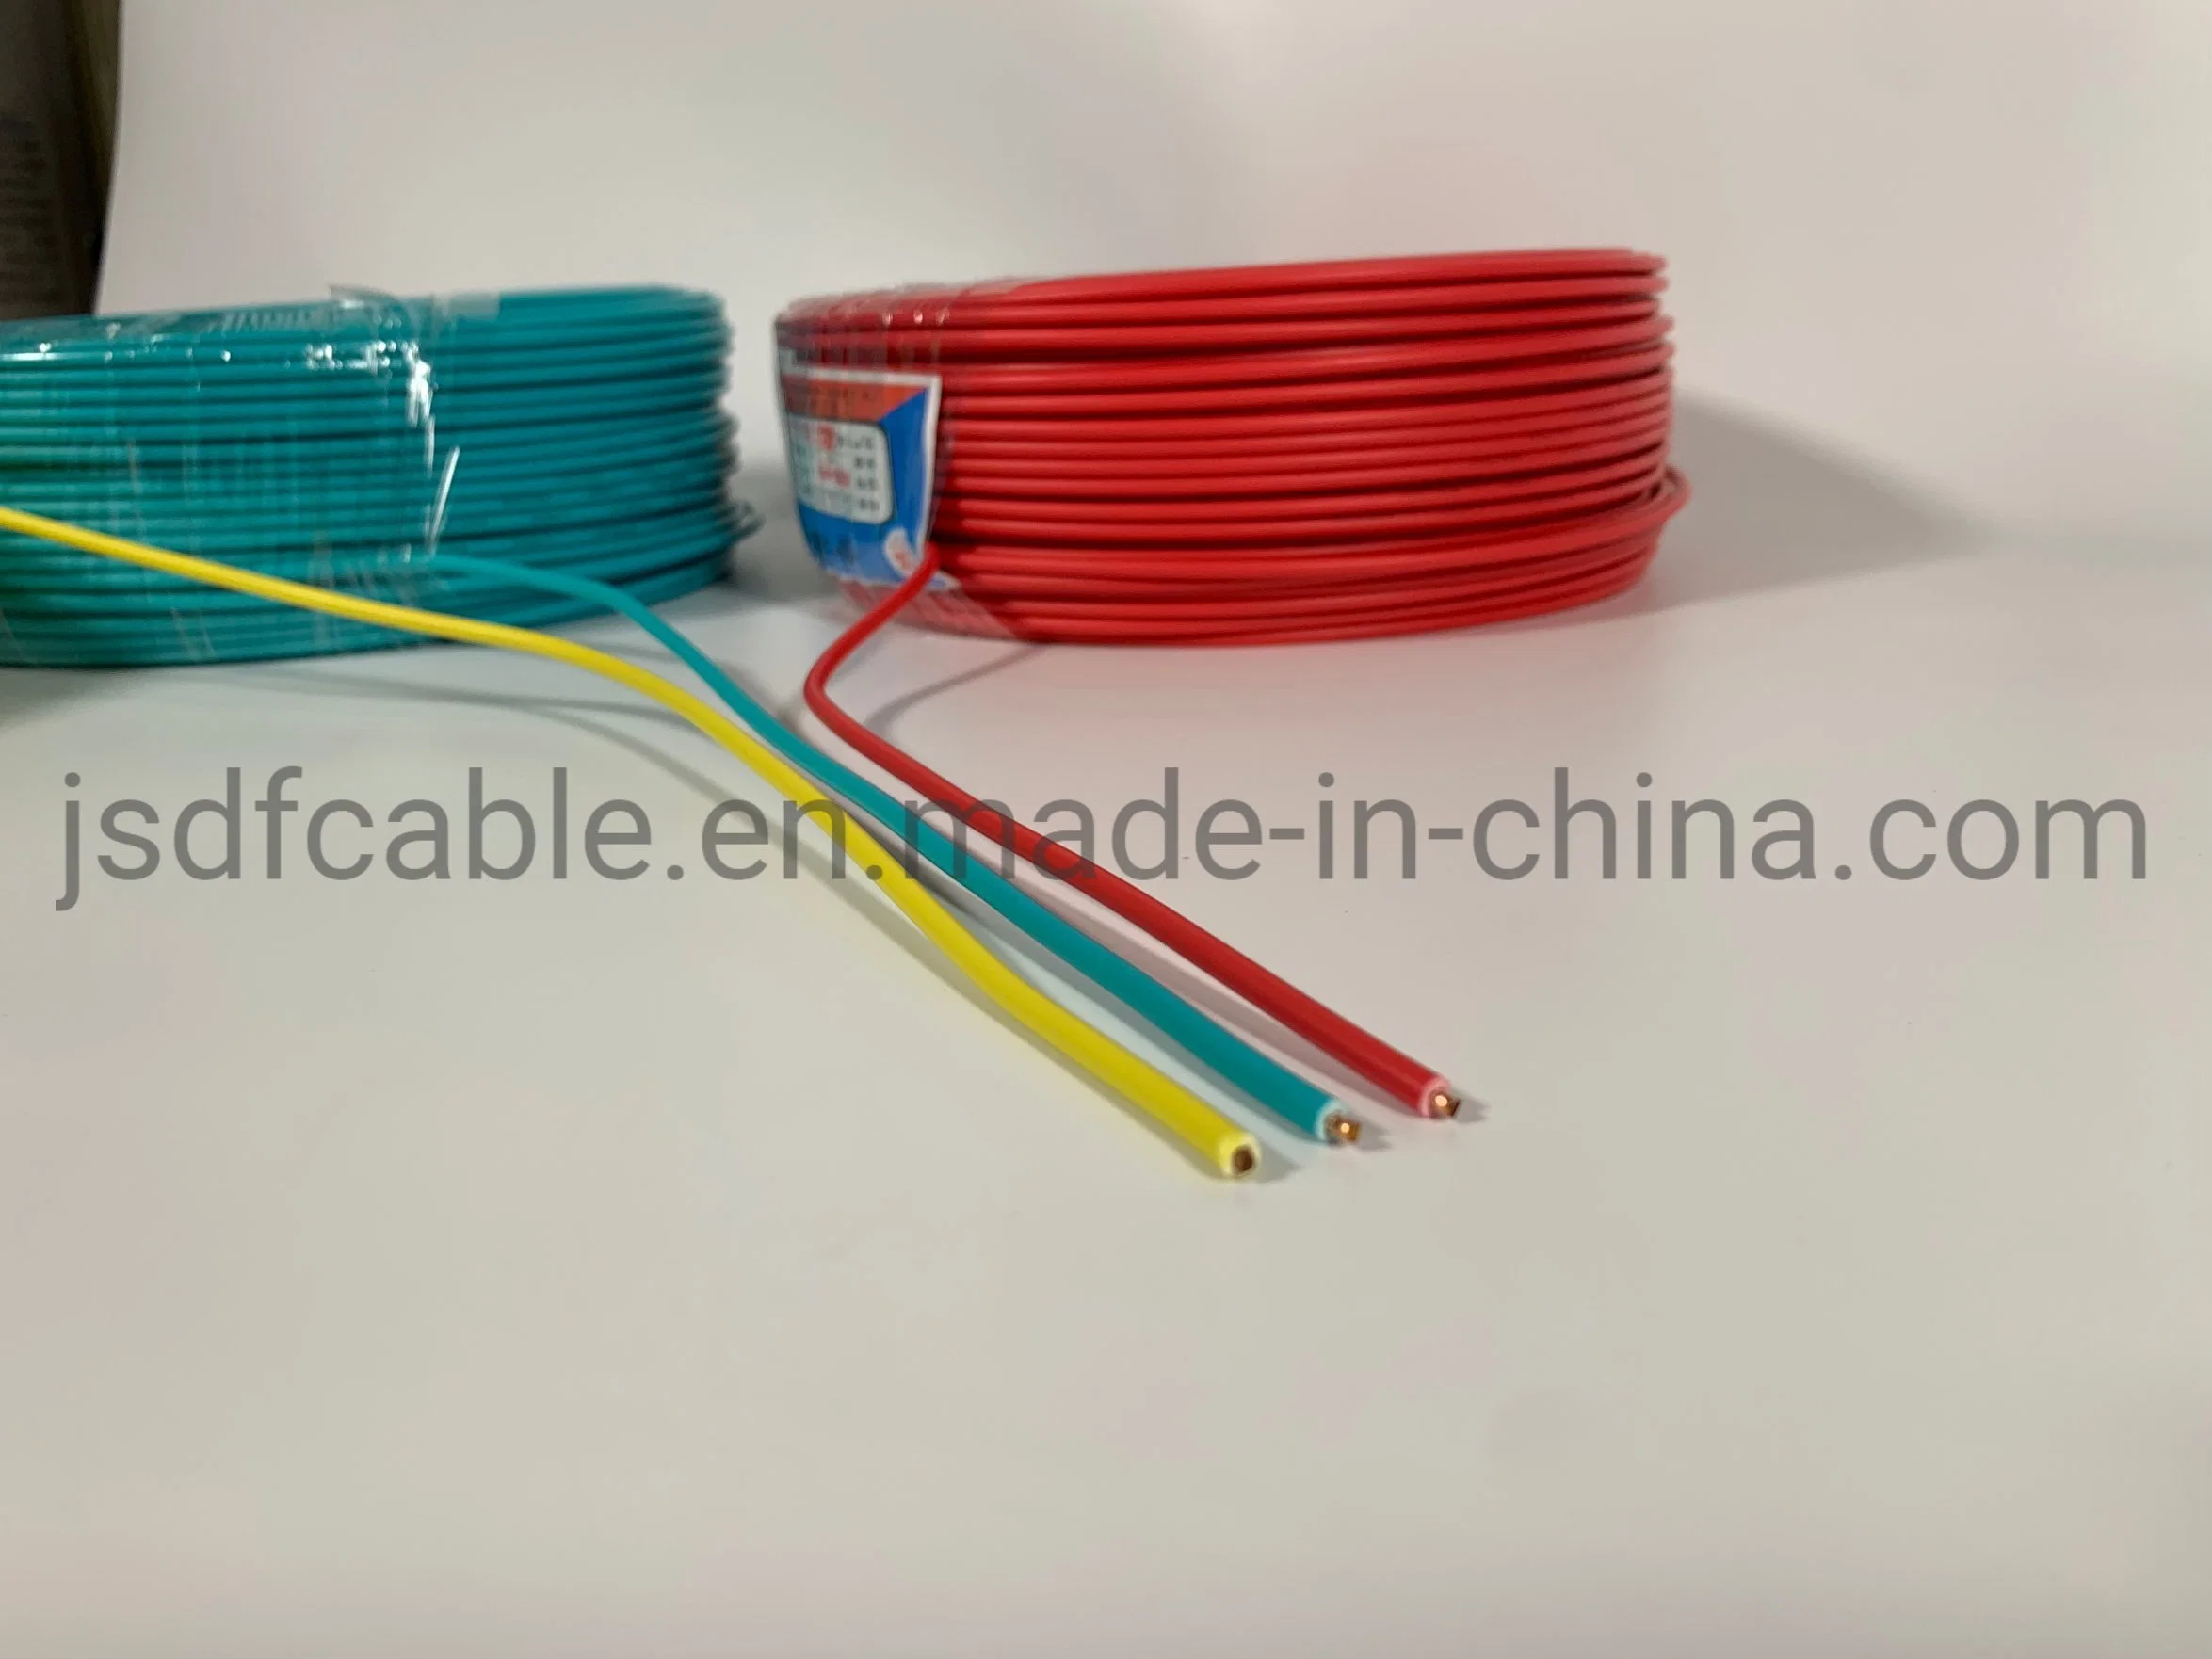 Electric Wires Copper Core Irradiation Cross-Linked Halogen-Free Low-Smoke Polyolefin Insulation Flame Retardant Class B Wire